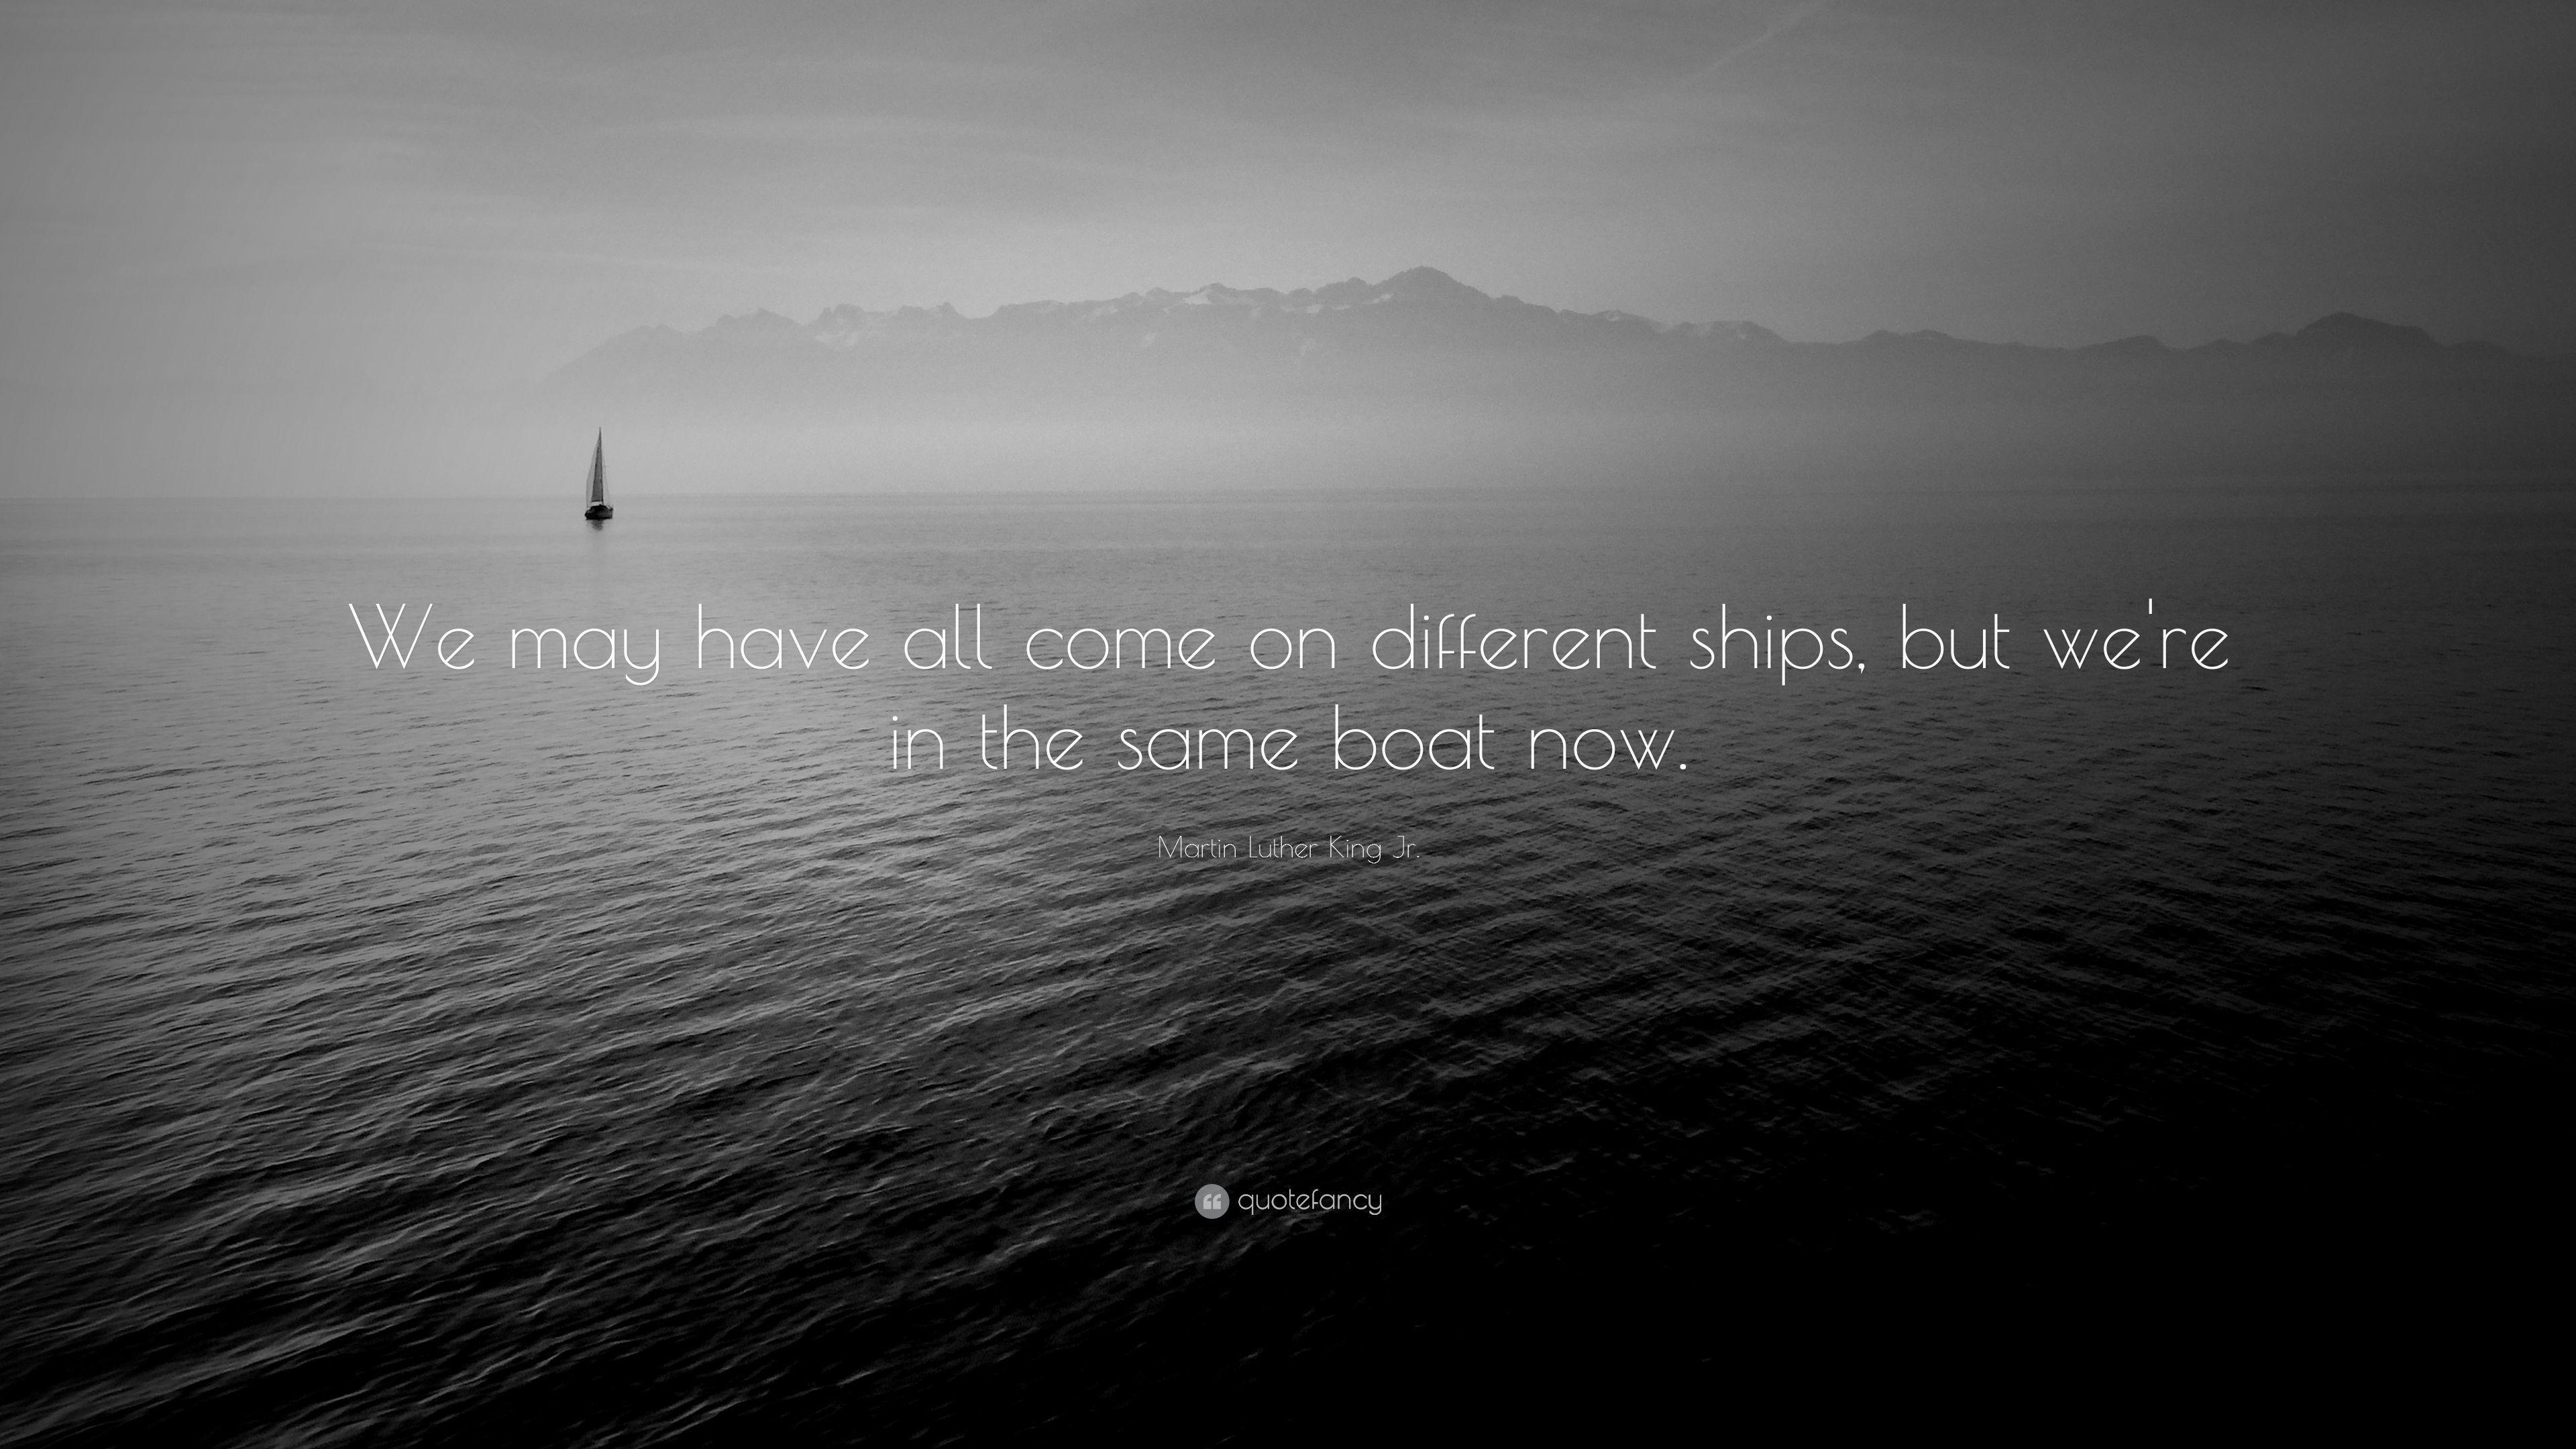 Martin Luther King Jr. Quote: “We may have all come on different